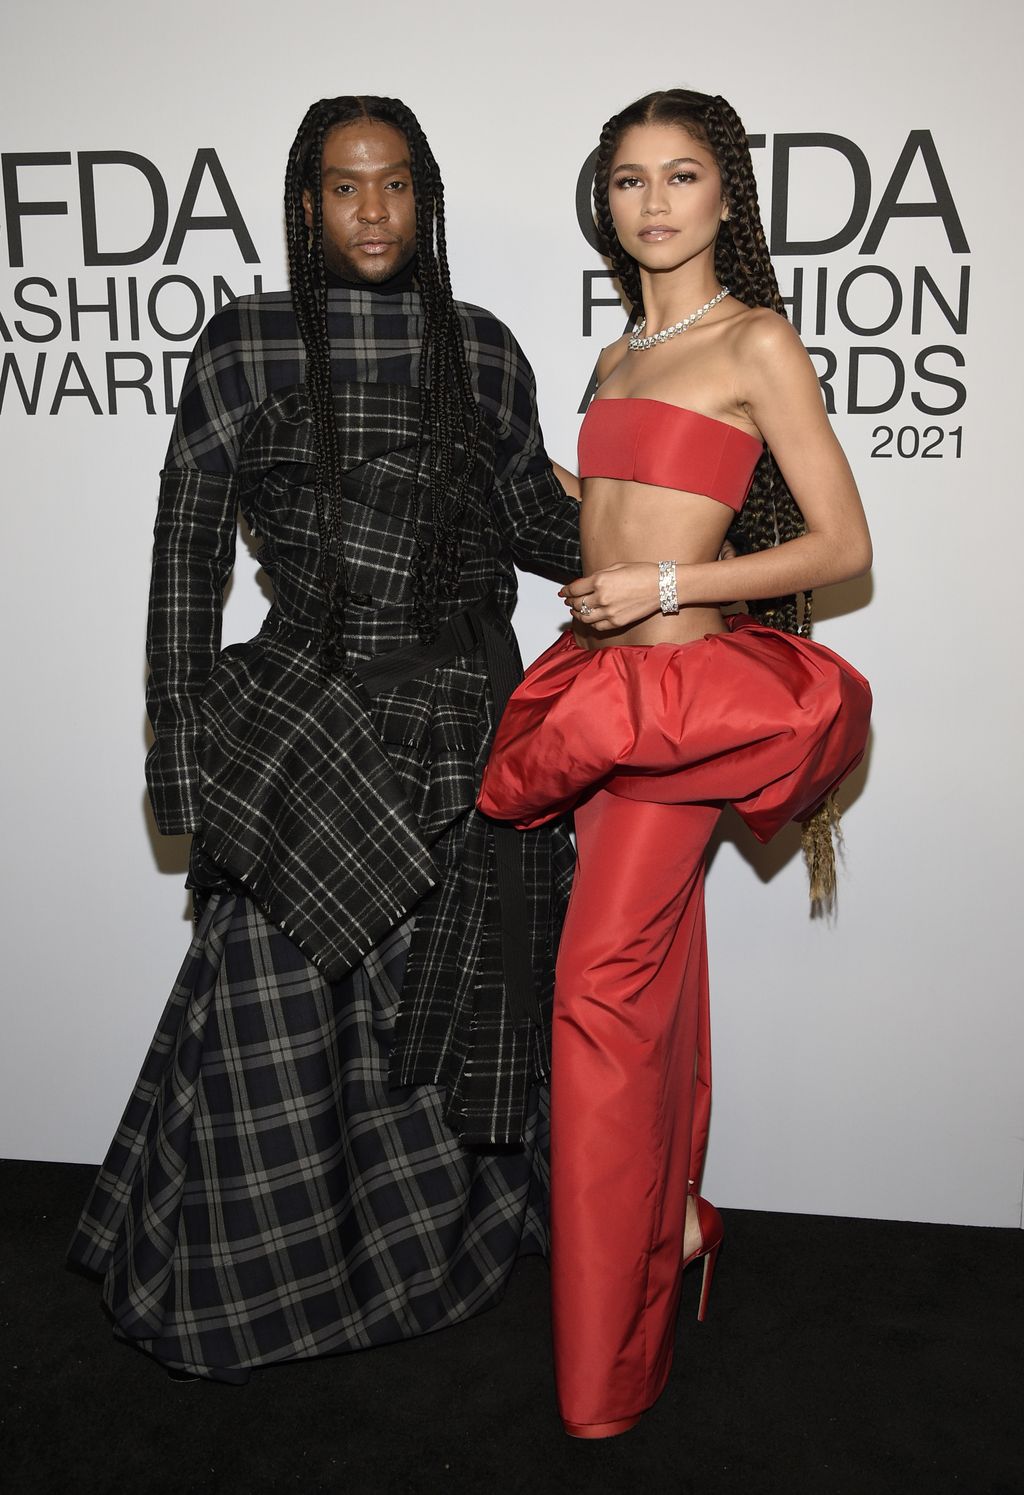 Vera Wang, left, and Zendaya attend the CFDA Fashion Awards at The Pool and The Grill on Wednesday, Nov. 10, 2021, in New York. (Photo by Evan Agostini/Invision/AP)